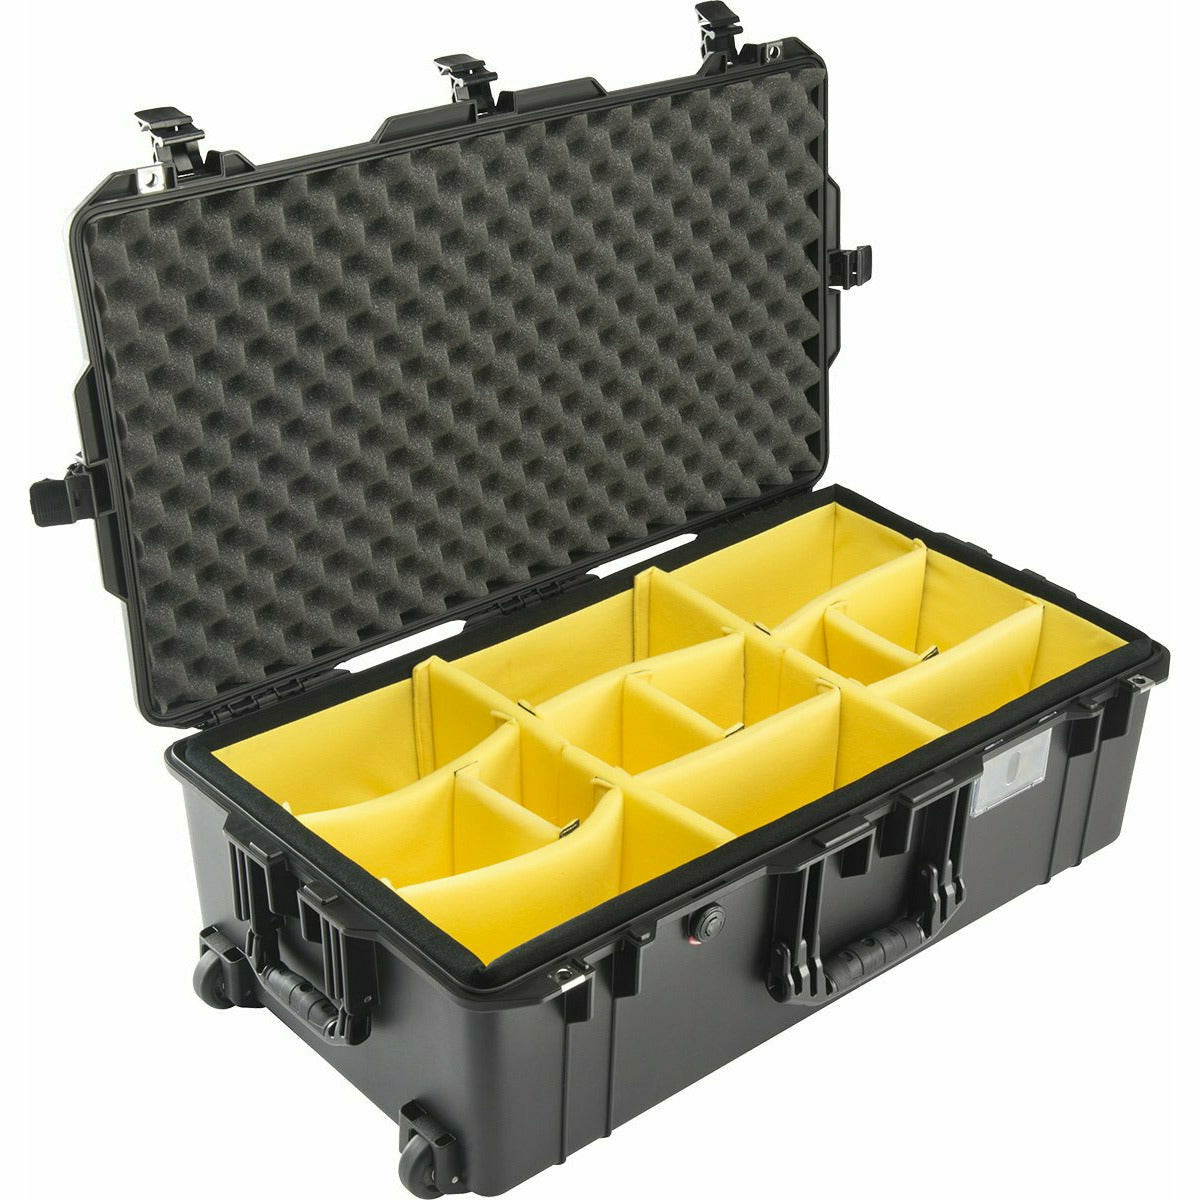 Pelican 1615 Air Case Black with Padded Dividers - Dragon Image